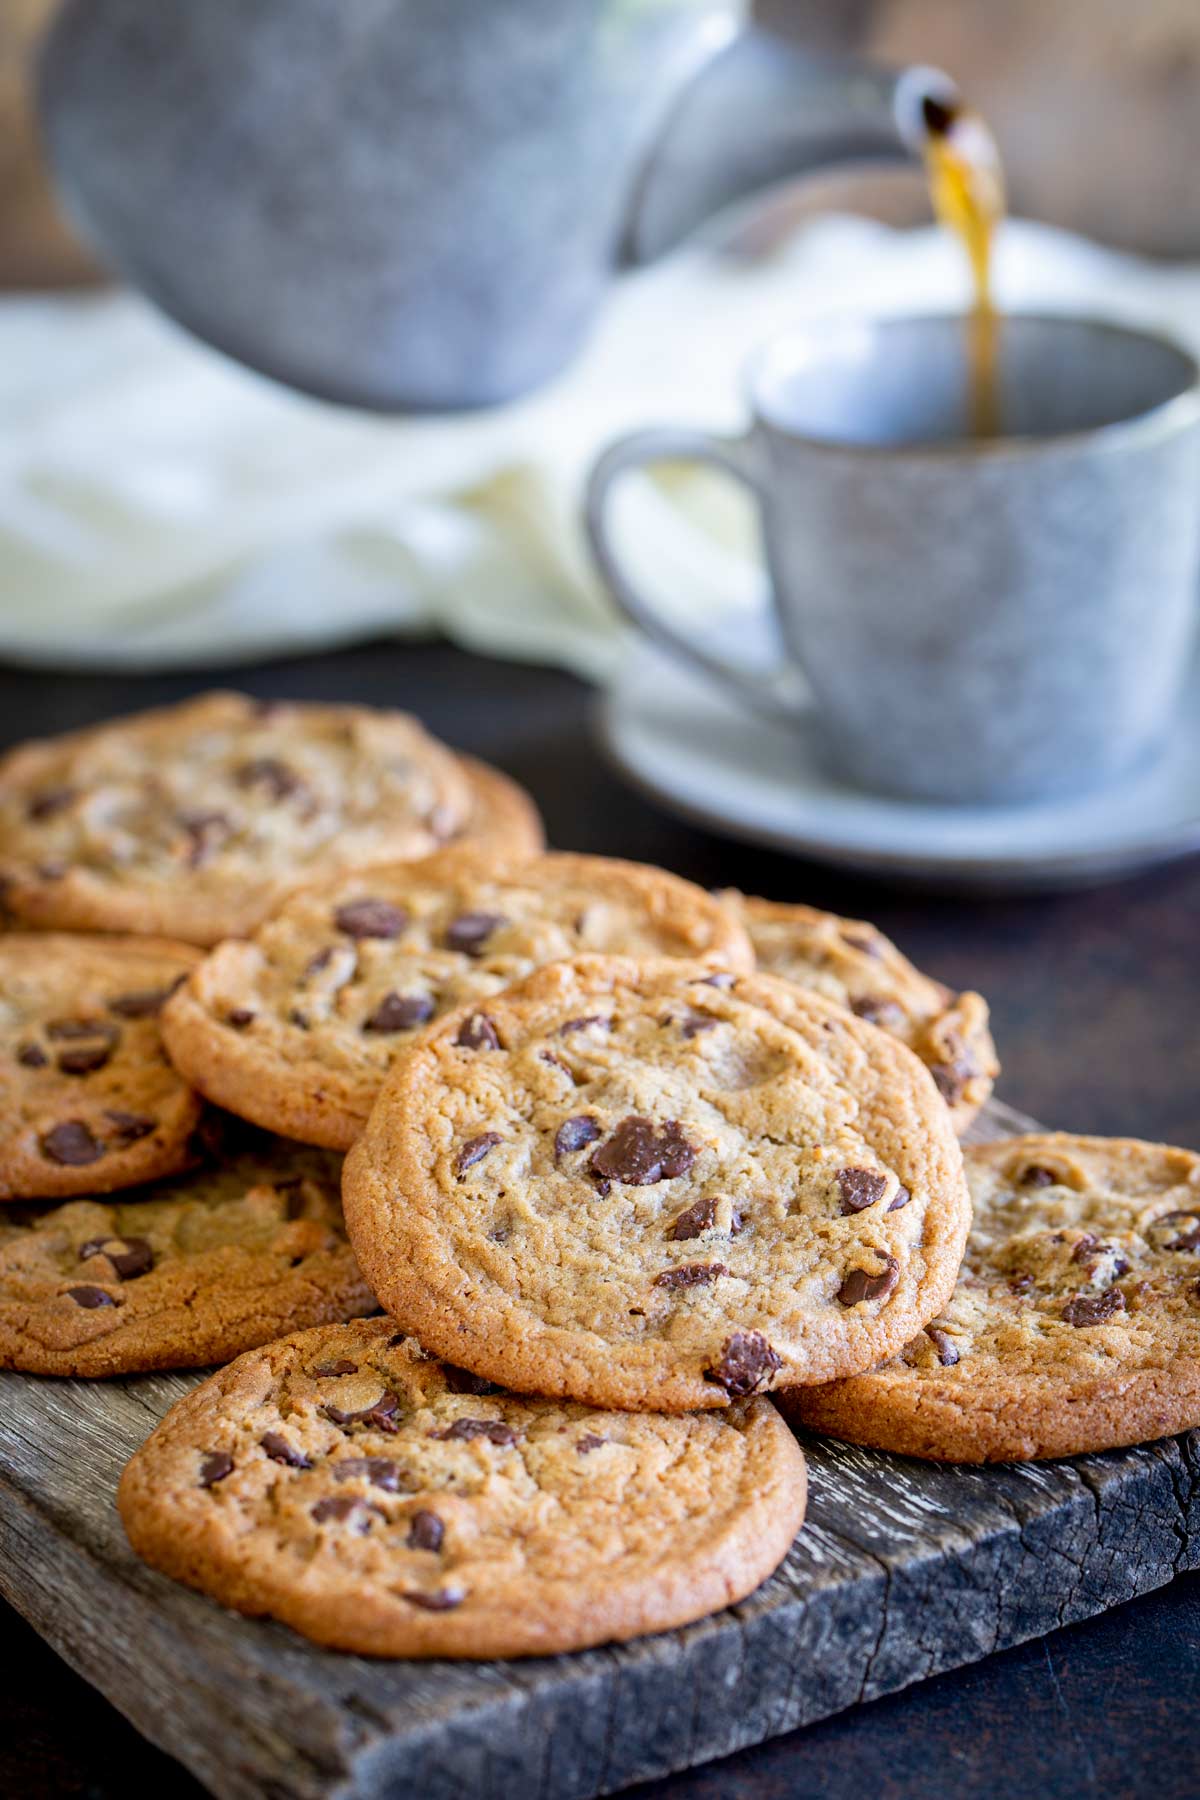 choc chip cookies on a wooden board with a teapot behind